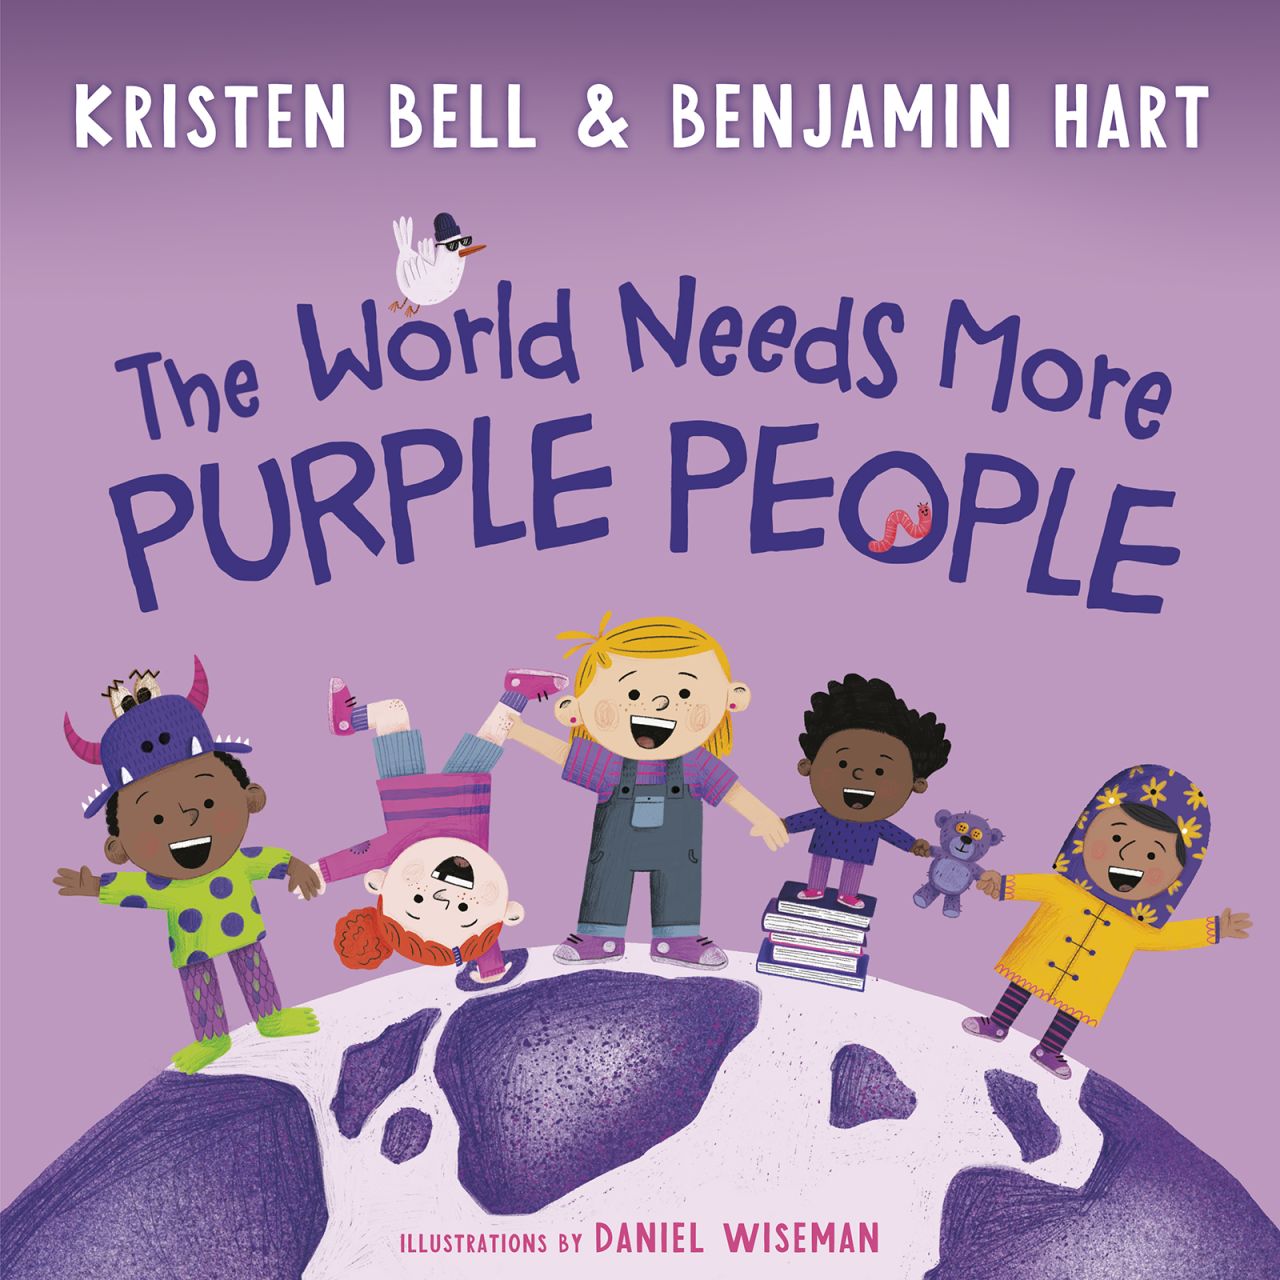 Actress Kristen Bell asks everyone to become Purple People and bring their communities together in "The World Needs More Purple People."